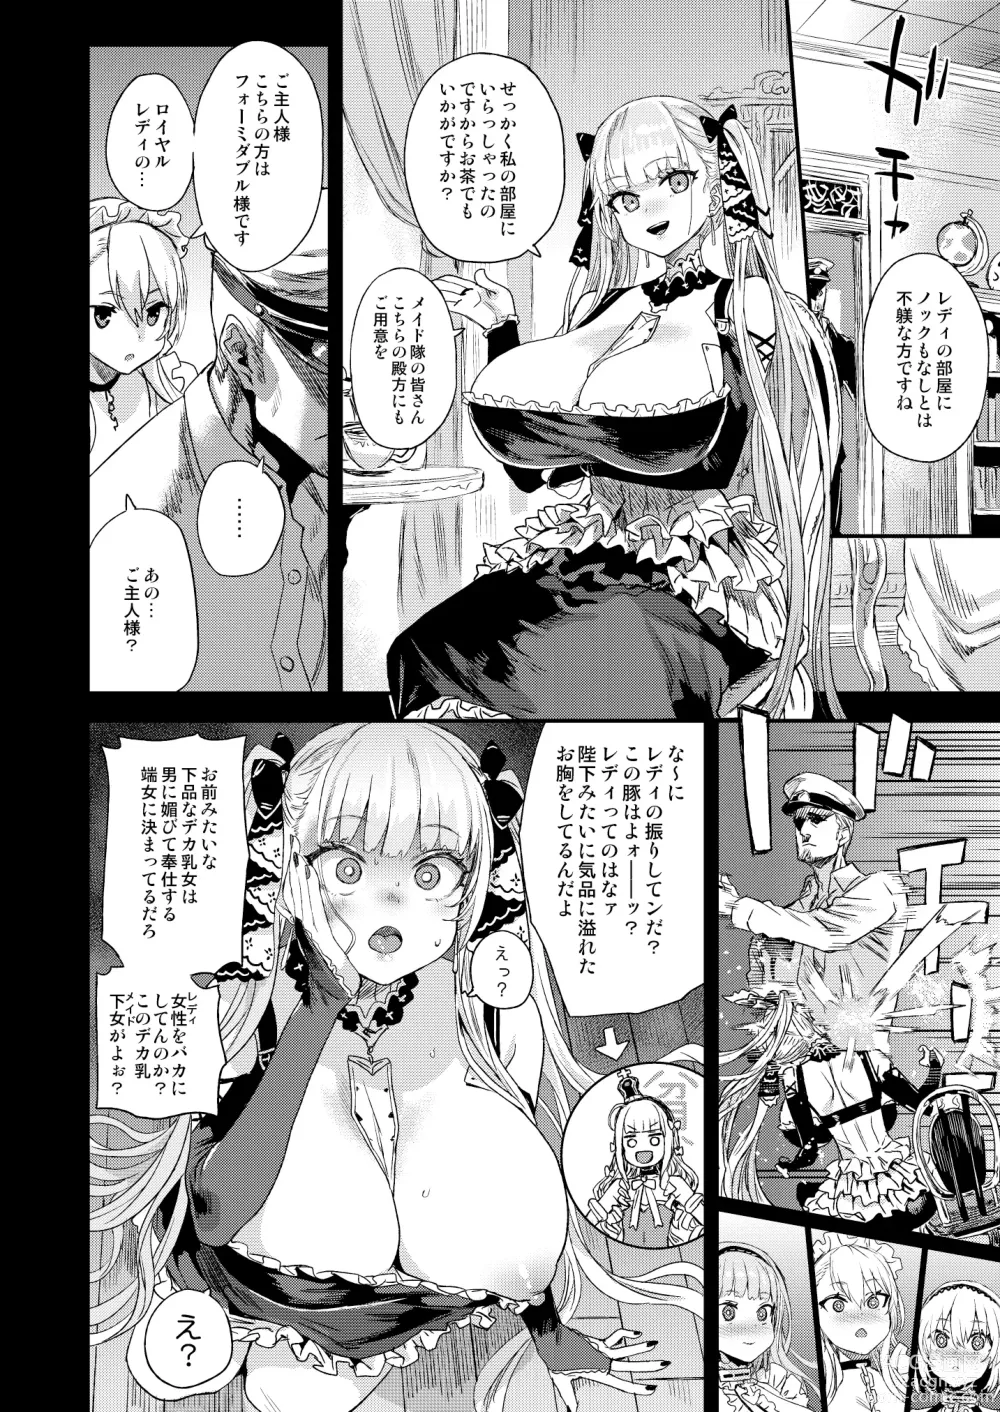 Page 4 of doujinshi Lady falls into a maid